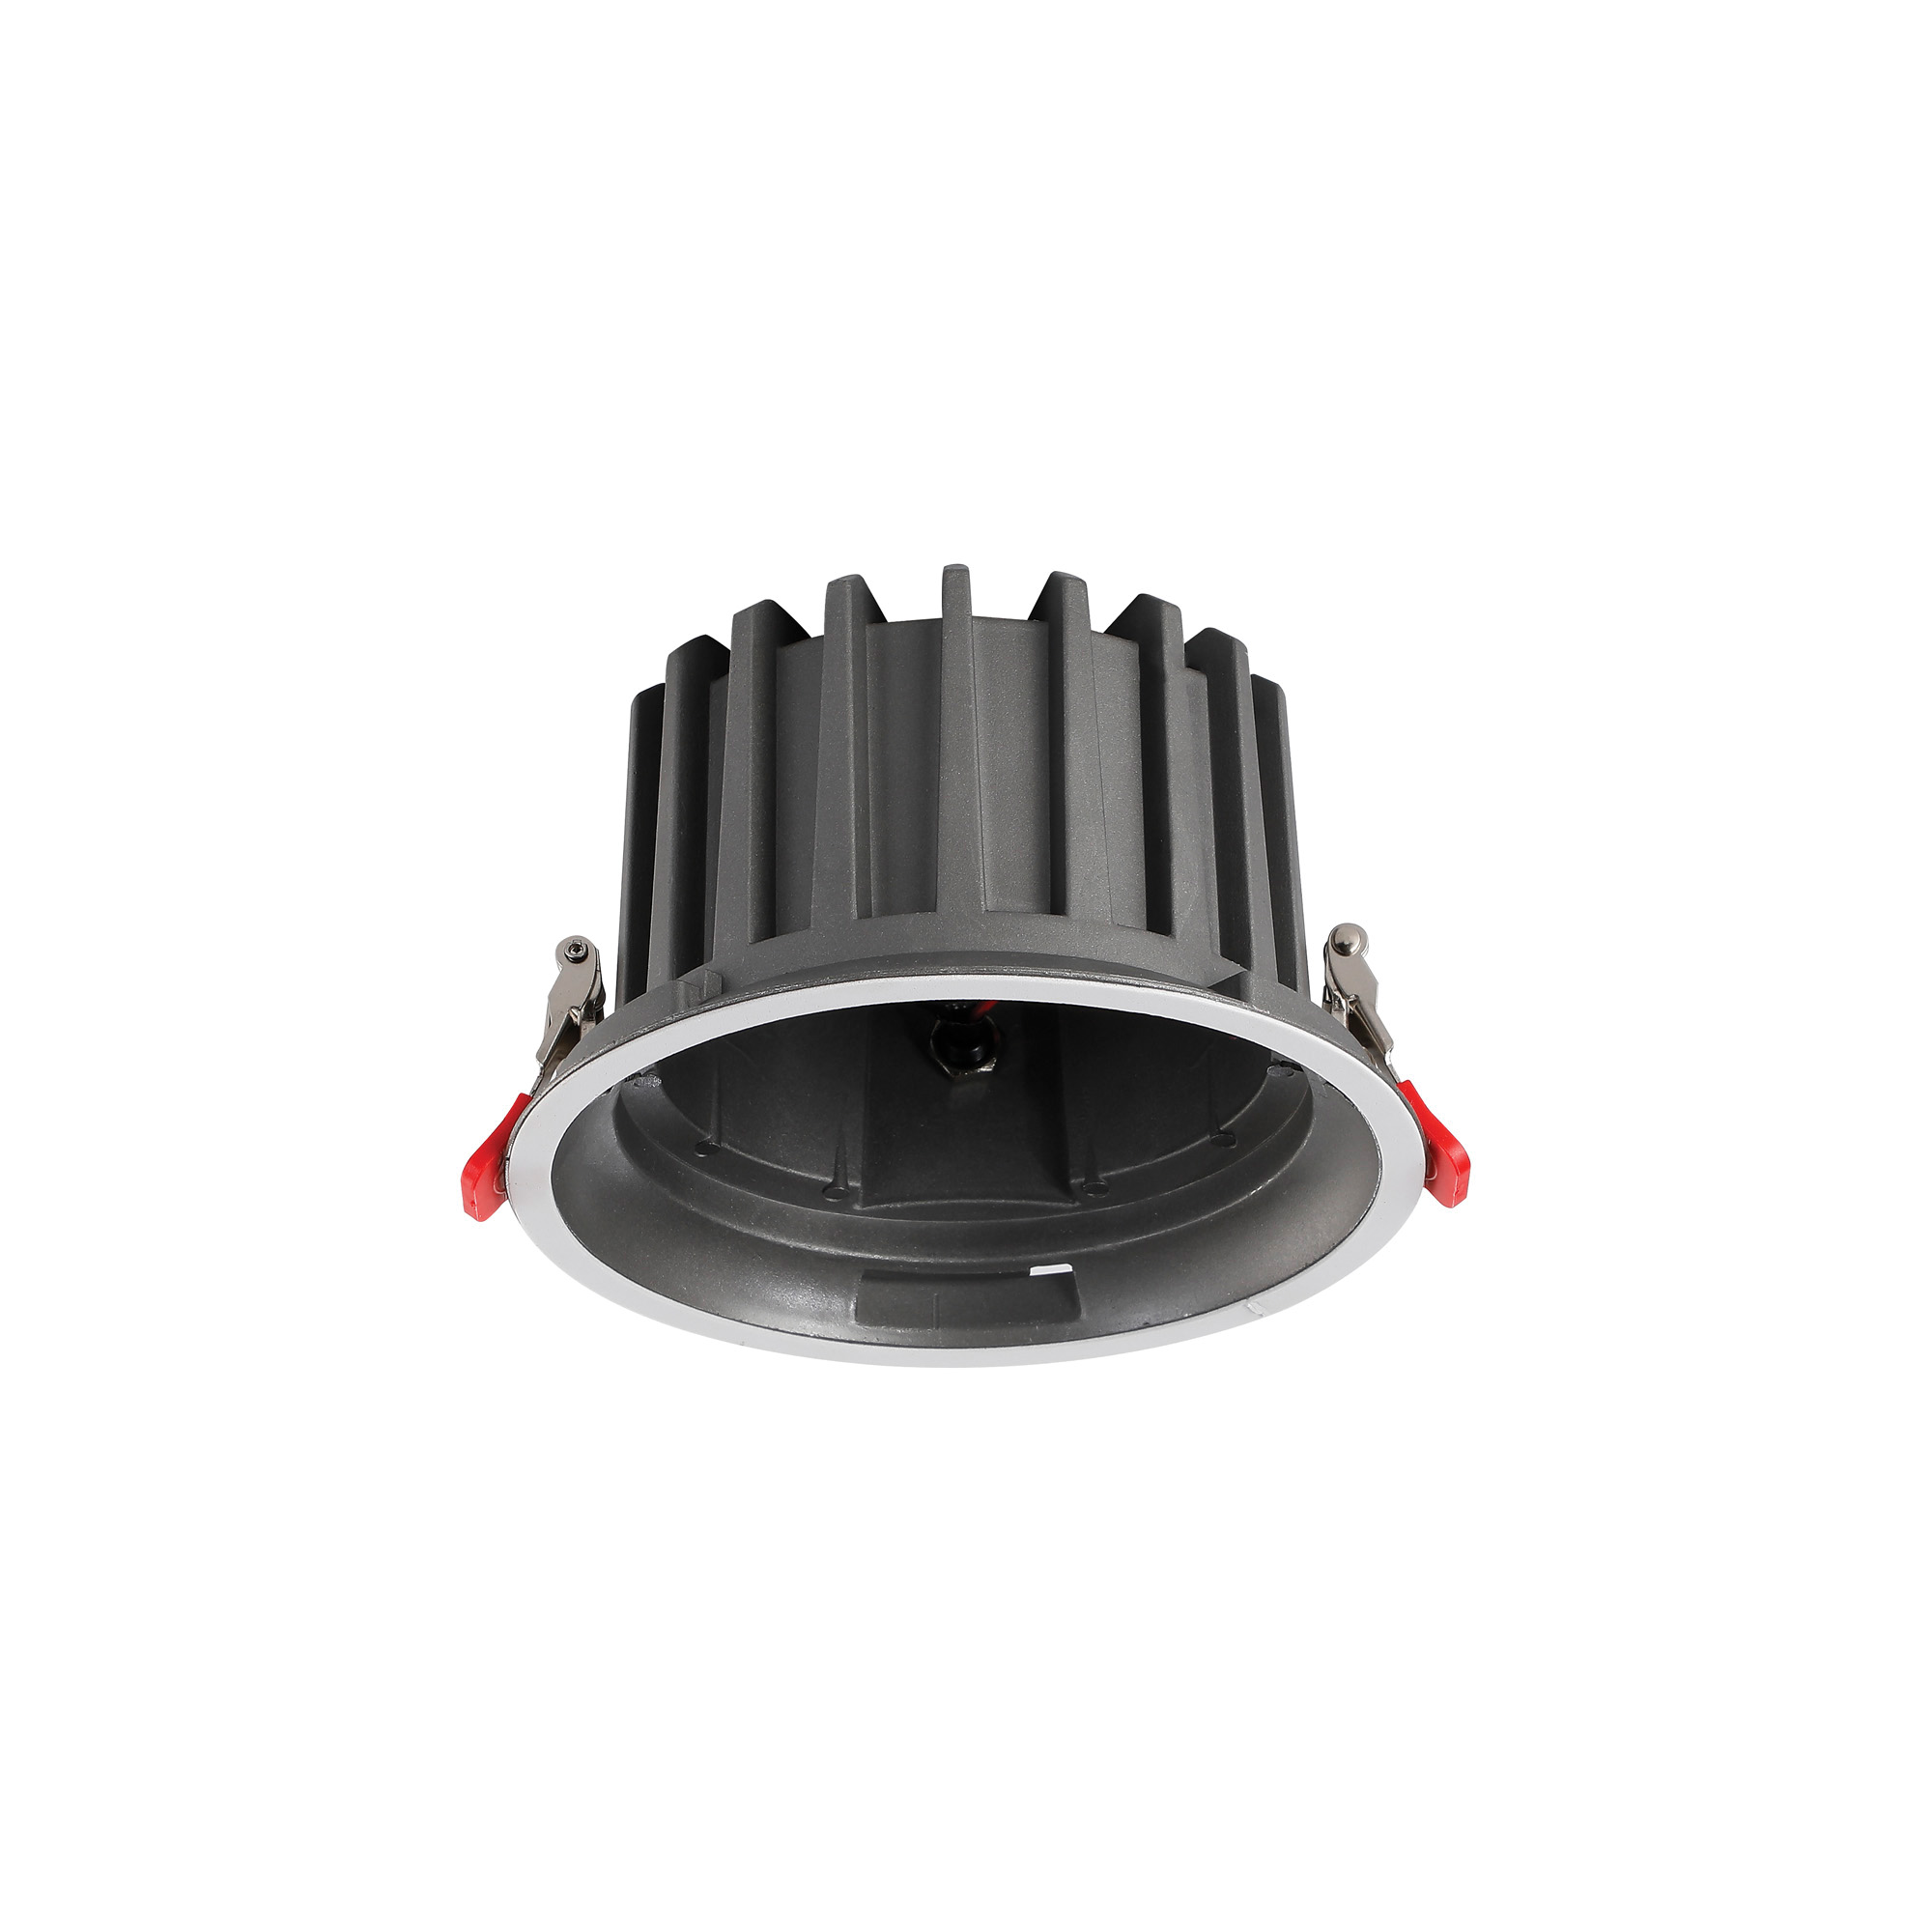 DX200421  Bionic 24W/30W Round RecessedFixed housing Only Without Light Engin , White, Suitable for Bionic Engine.